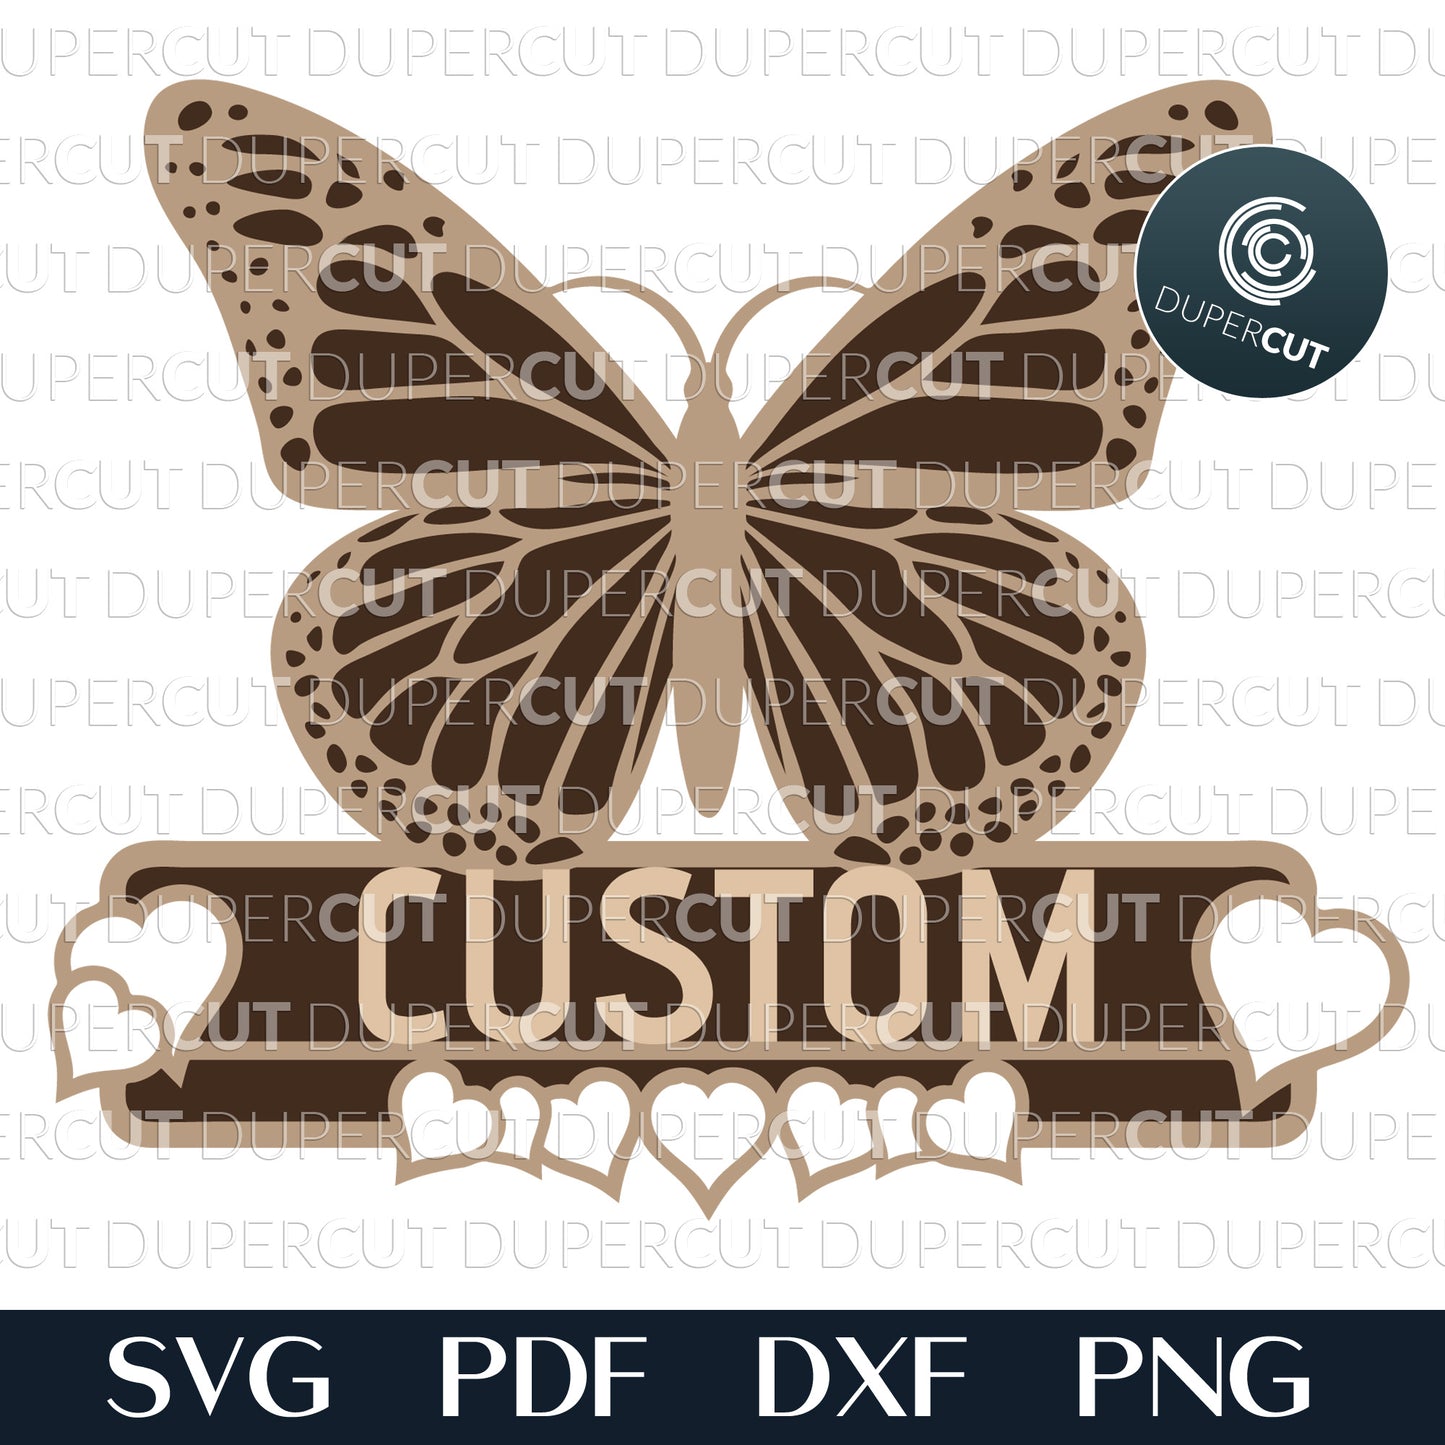 Cute butterfly custom name sign with hearts - SVG DXF vector layered cutting files for Glowforge, Cricut, Silhouette Cameo, laser cutting machines by DuperCut